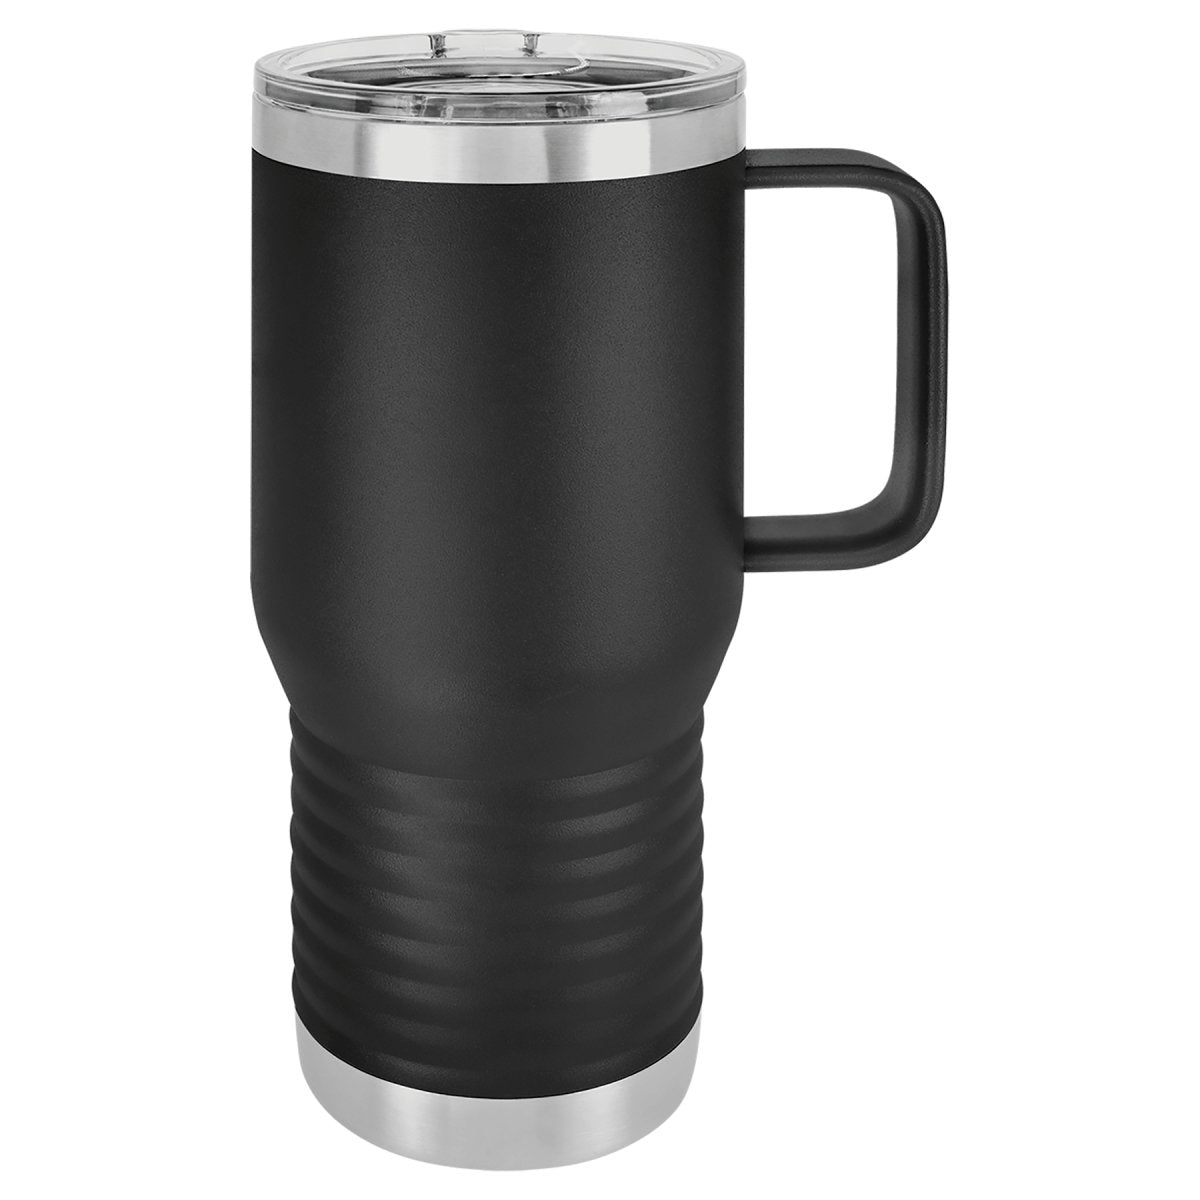 20 oz. Stainless Steel & Powder Coated Travel Mugs with Lid – The